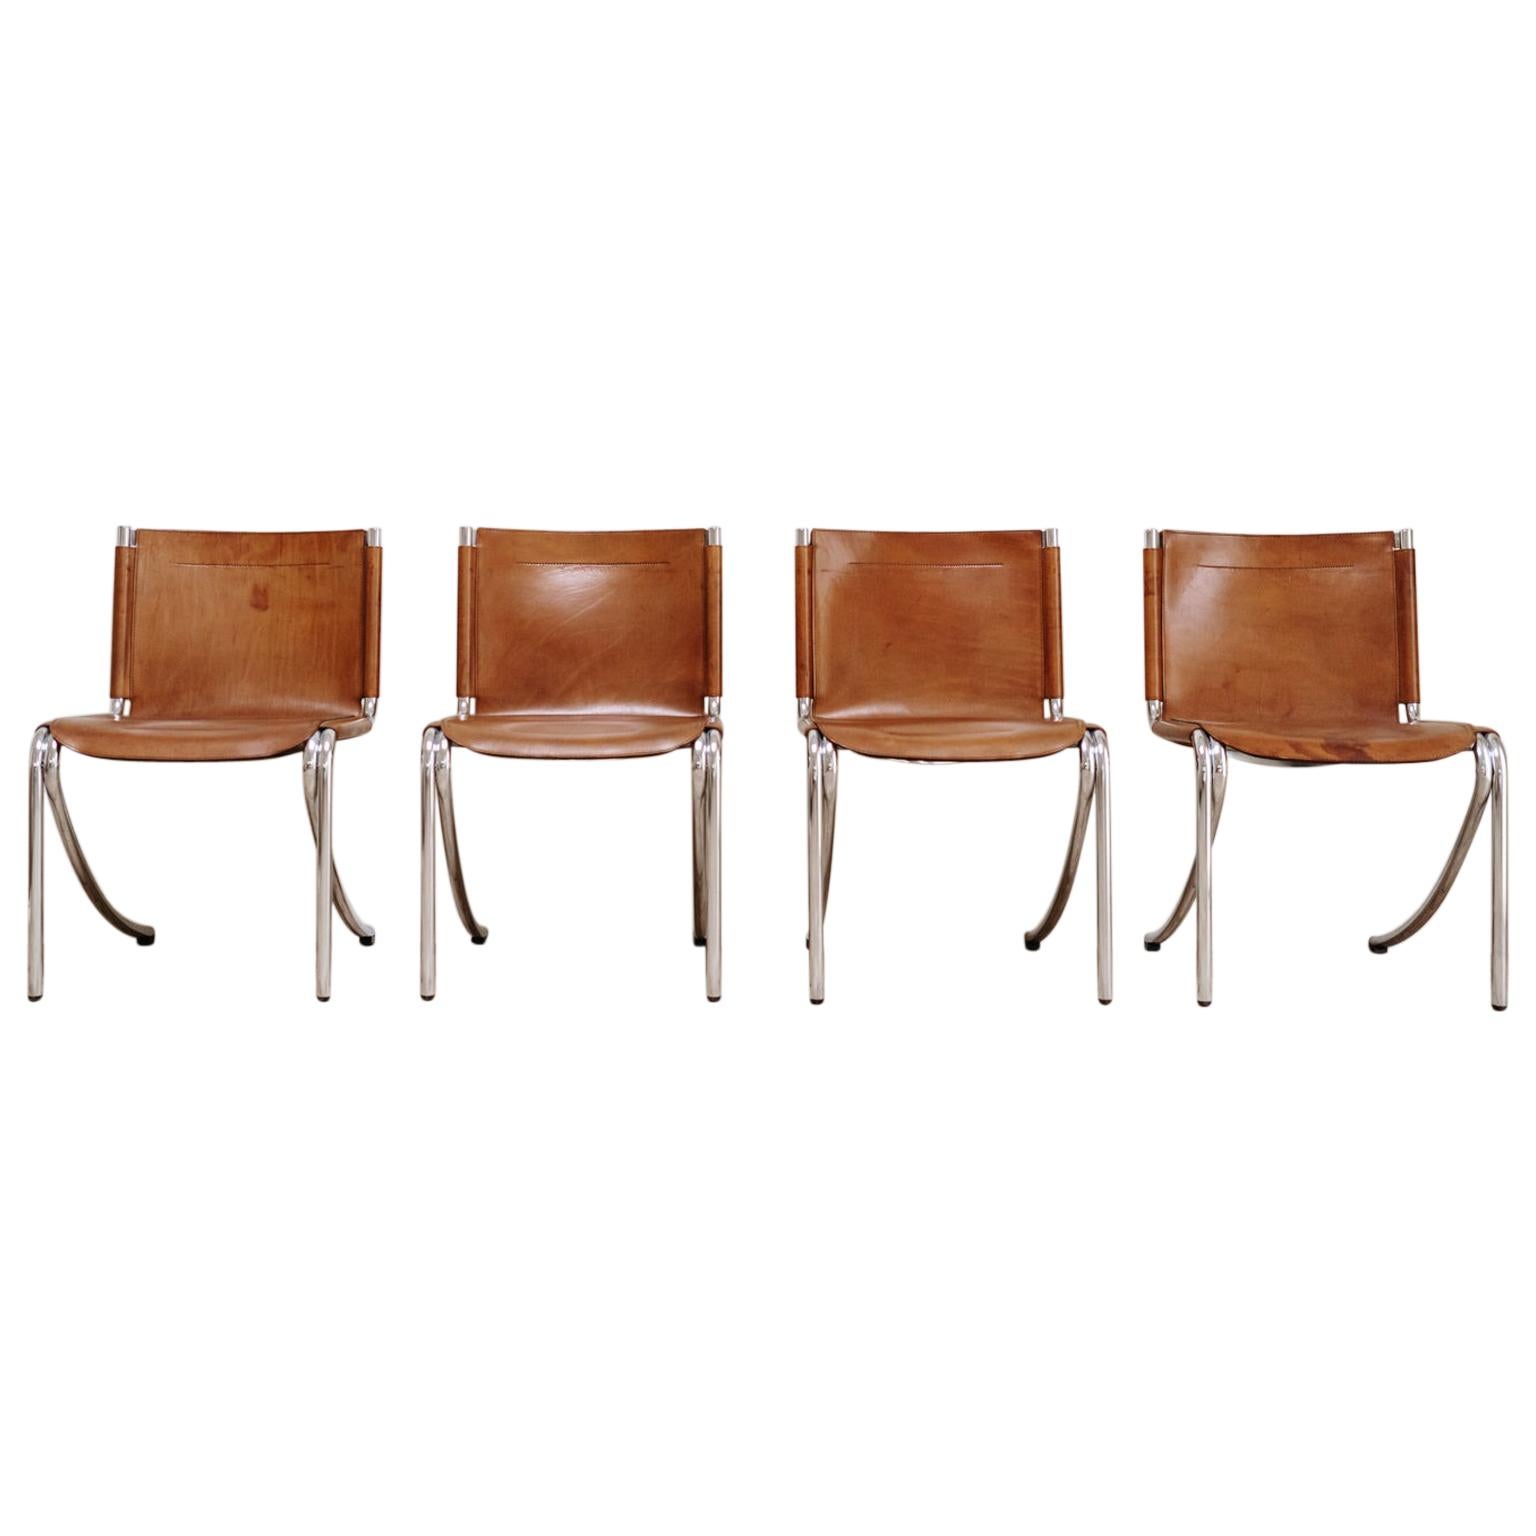 Set of 4 Cognac Leather and Steel Giotto Stoppino, "Jot" Chairs